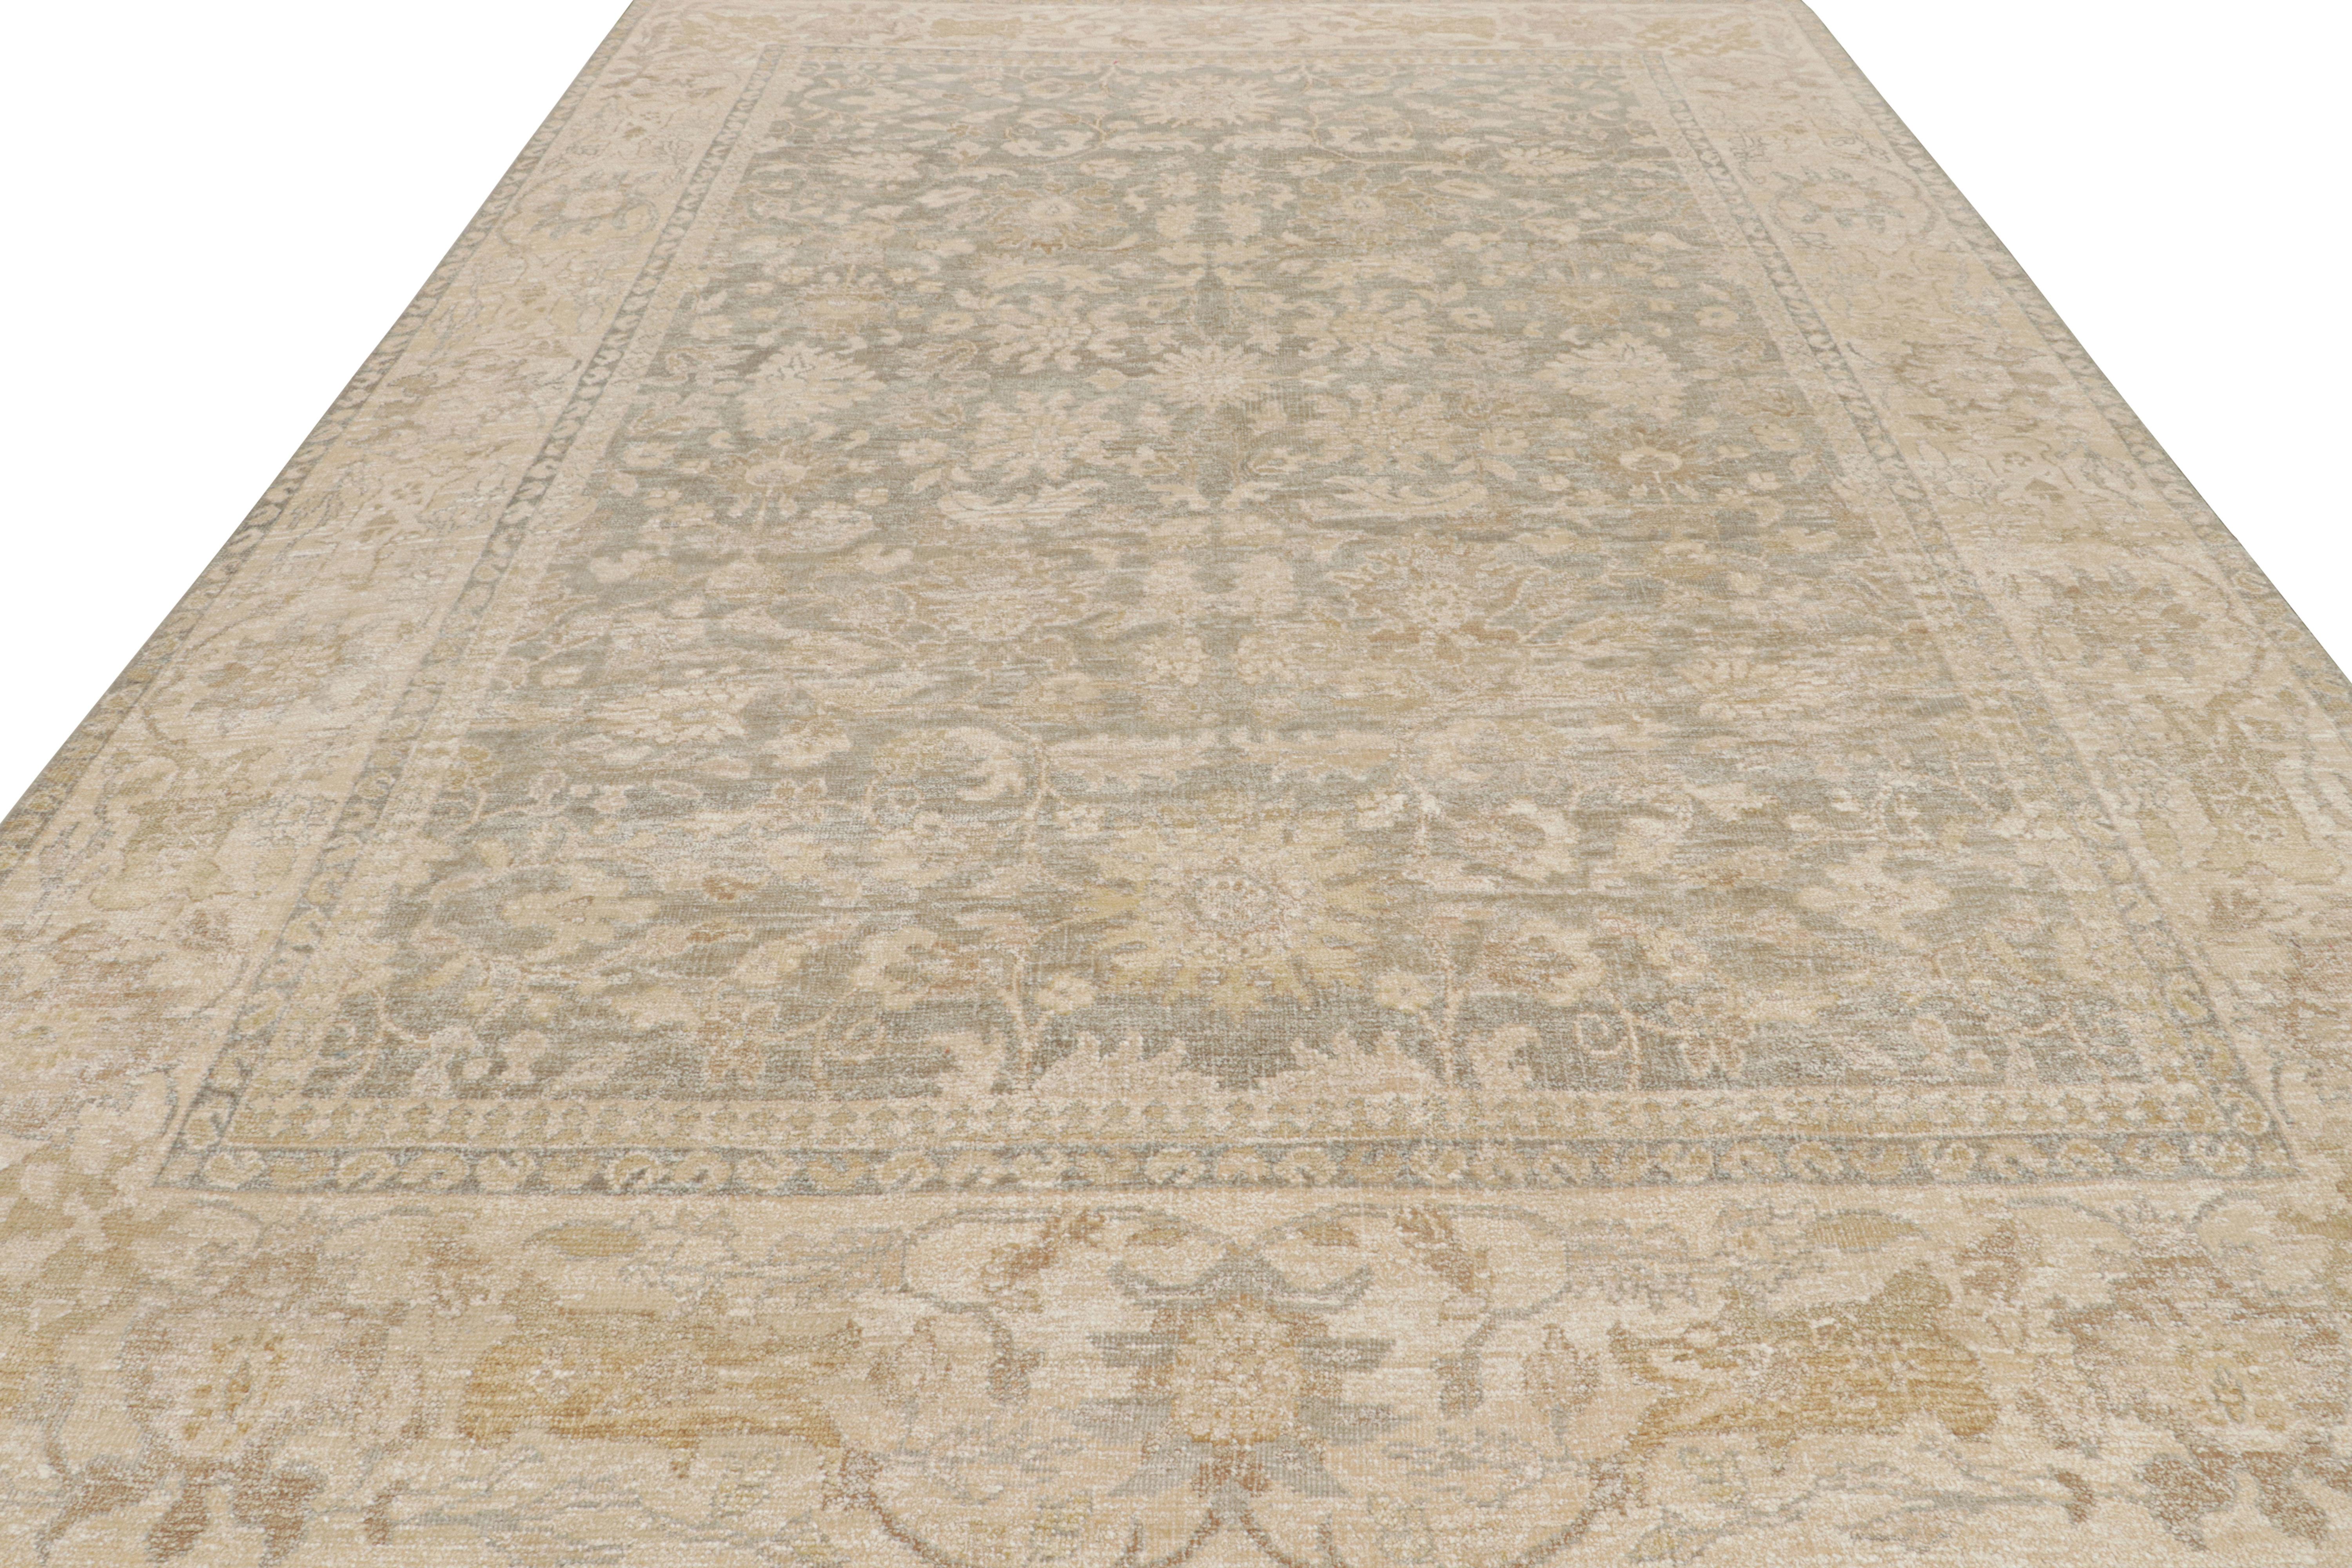 Indian Rug & Kilim’s Oushak Style Rug in Beige-Brown, Gray Floral Patterns For Sale